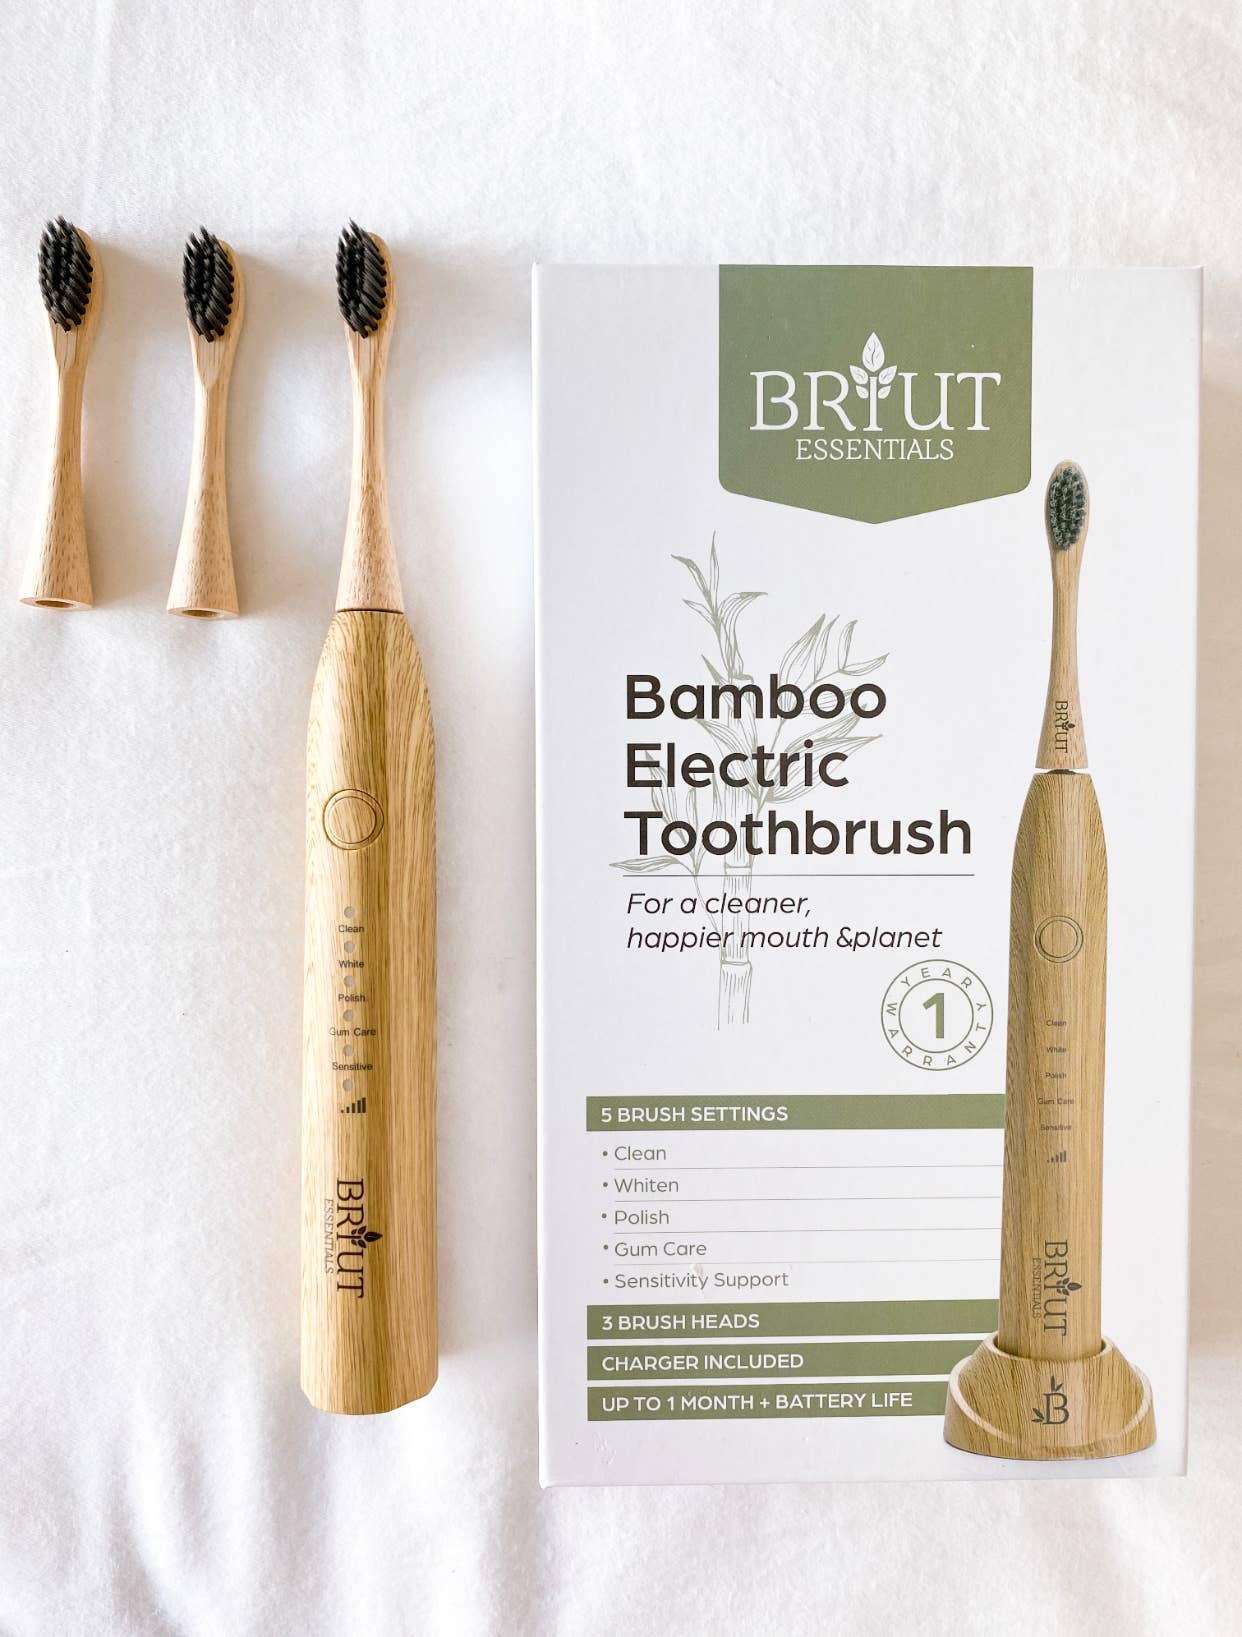 Bamboo (Sonicare Electric) Toothbrush